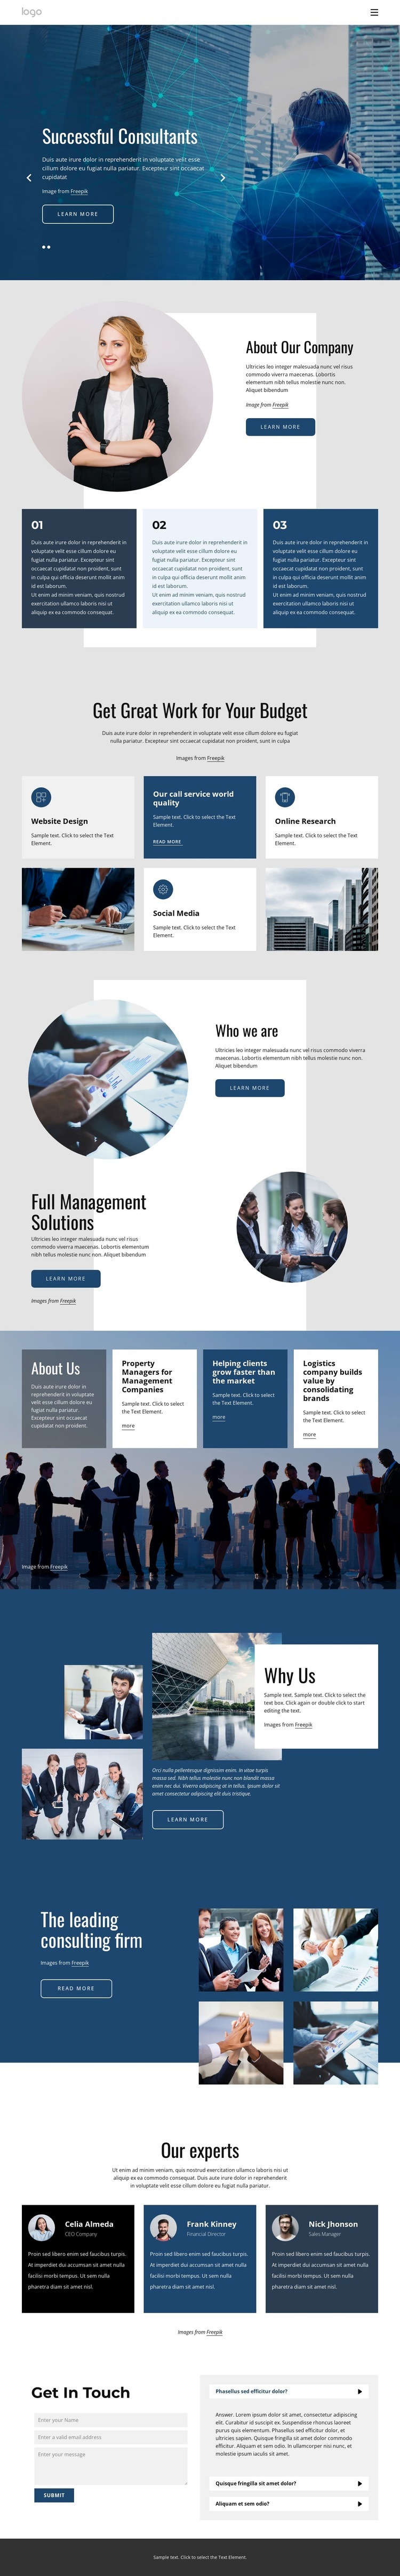 We offer tailored consulting services Homepage Design